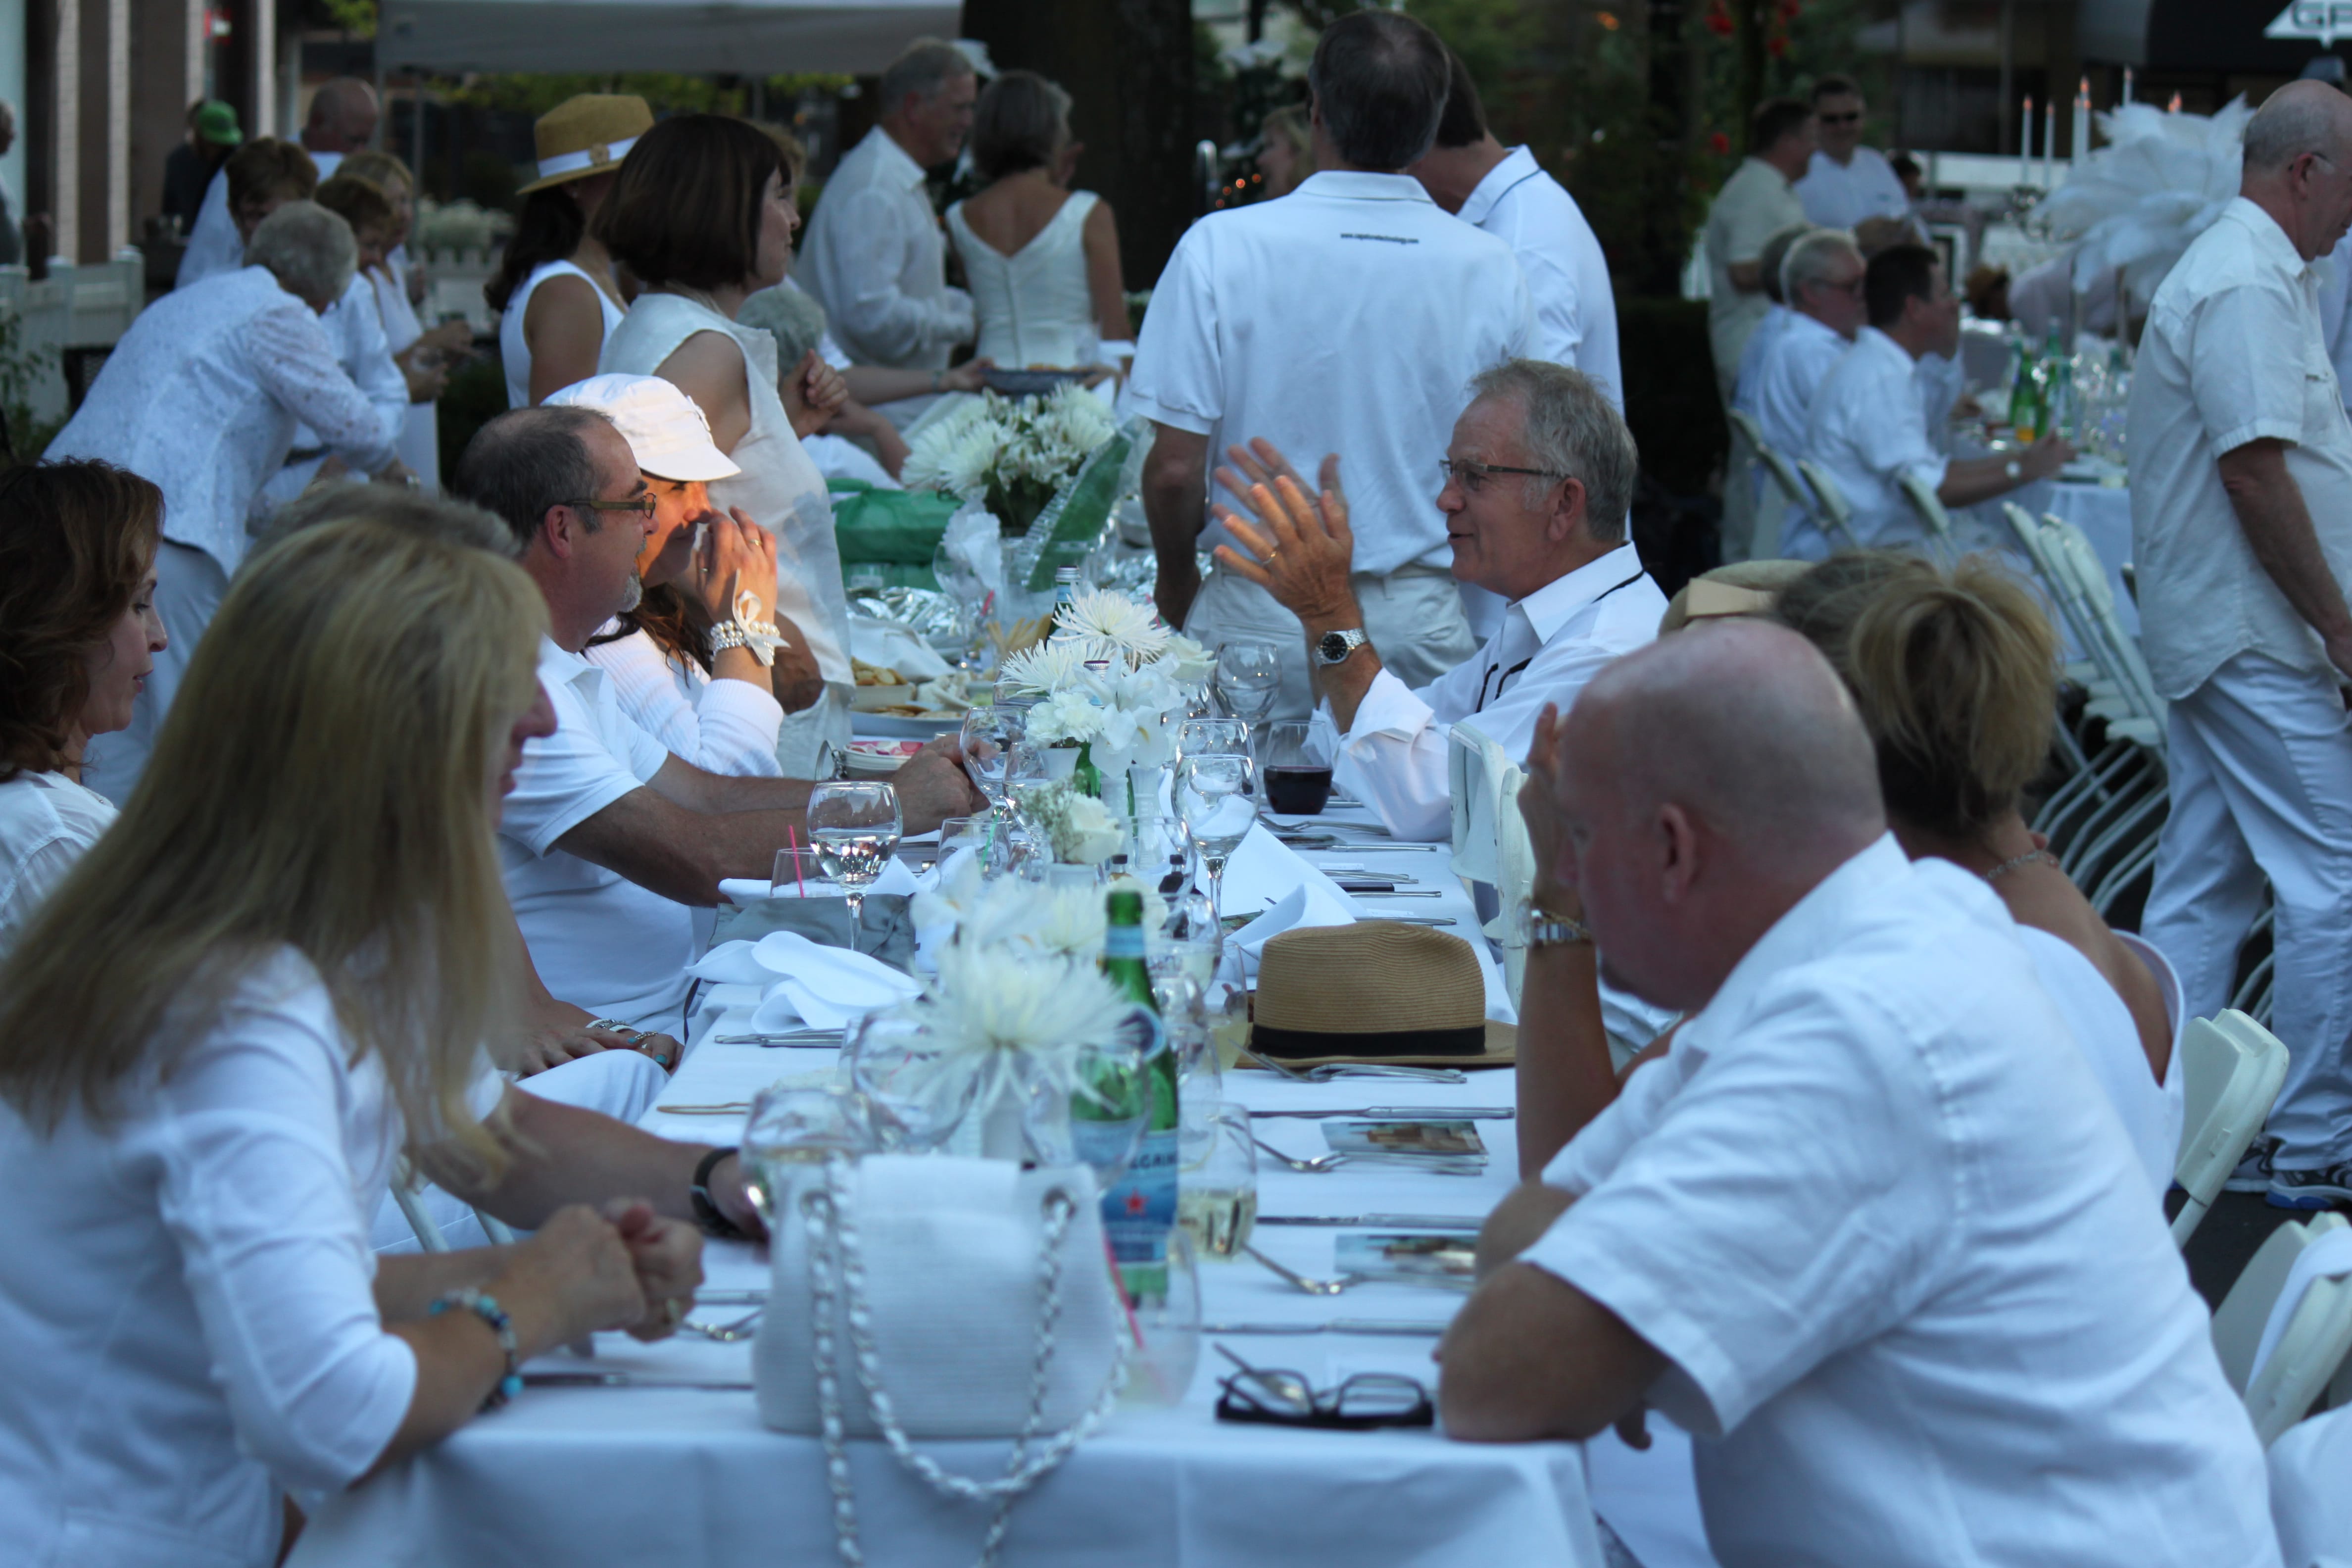 Friends and family enjoy food and drinks at the Camas in White event.